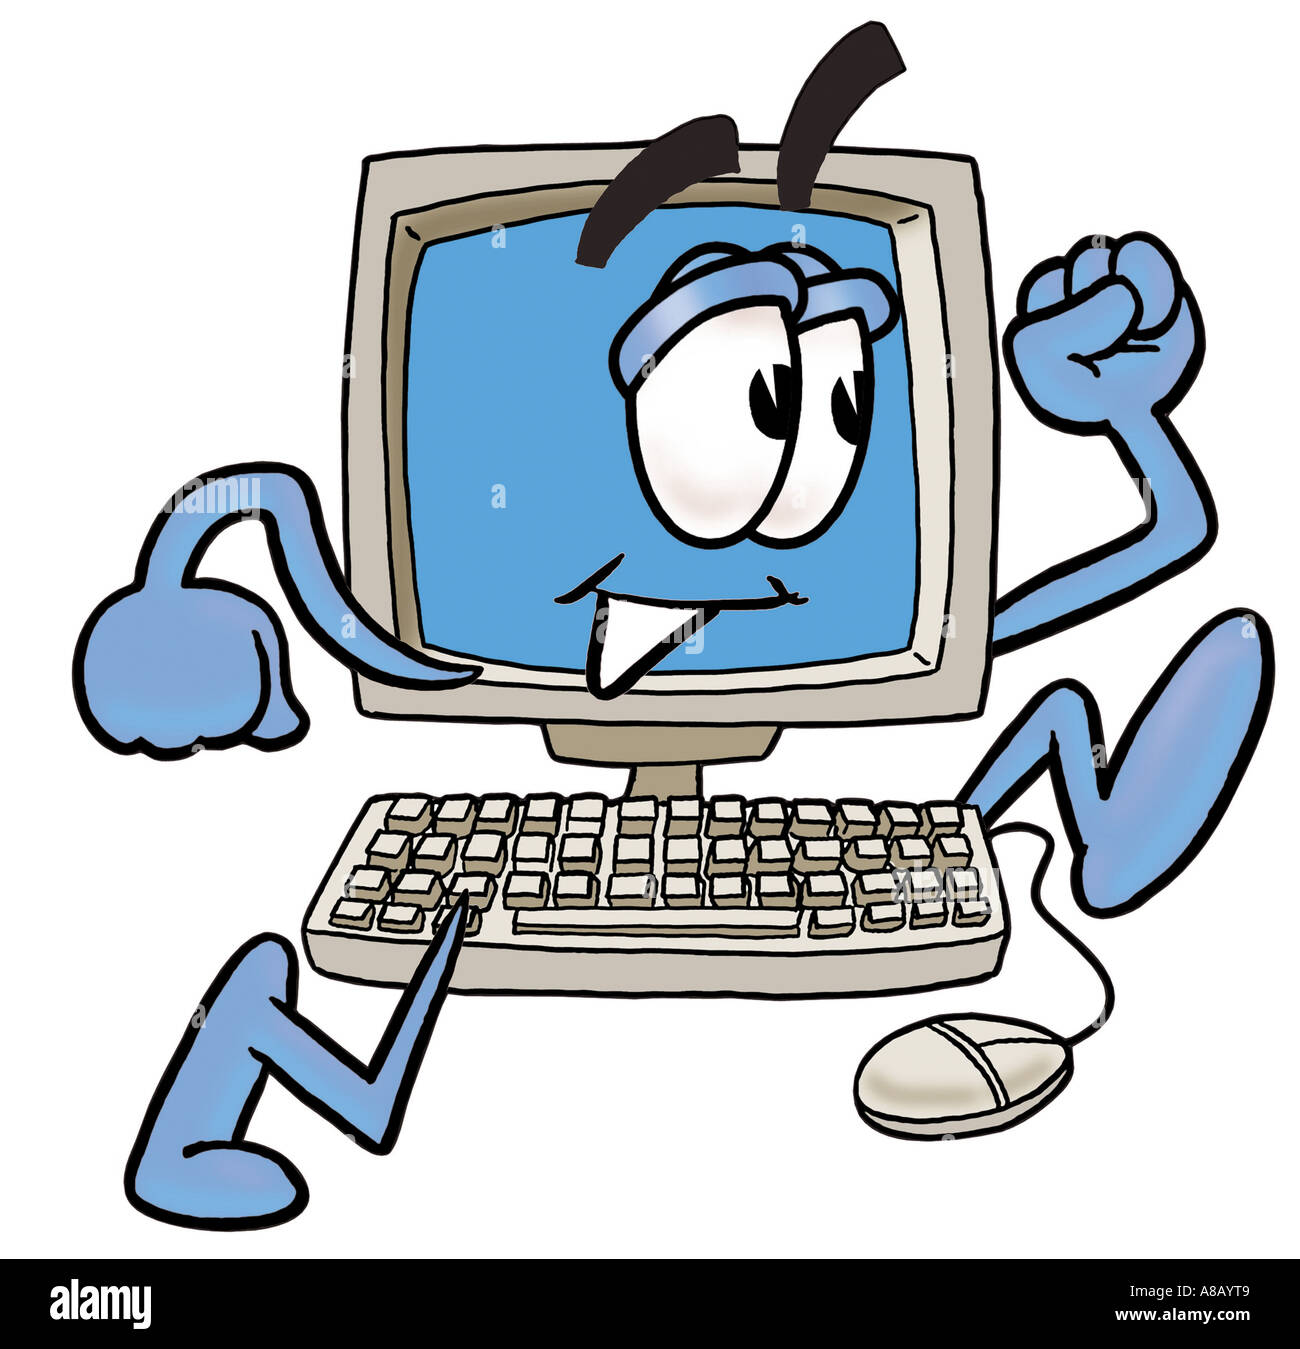 computer technology clipart free - photo #50